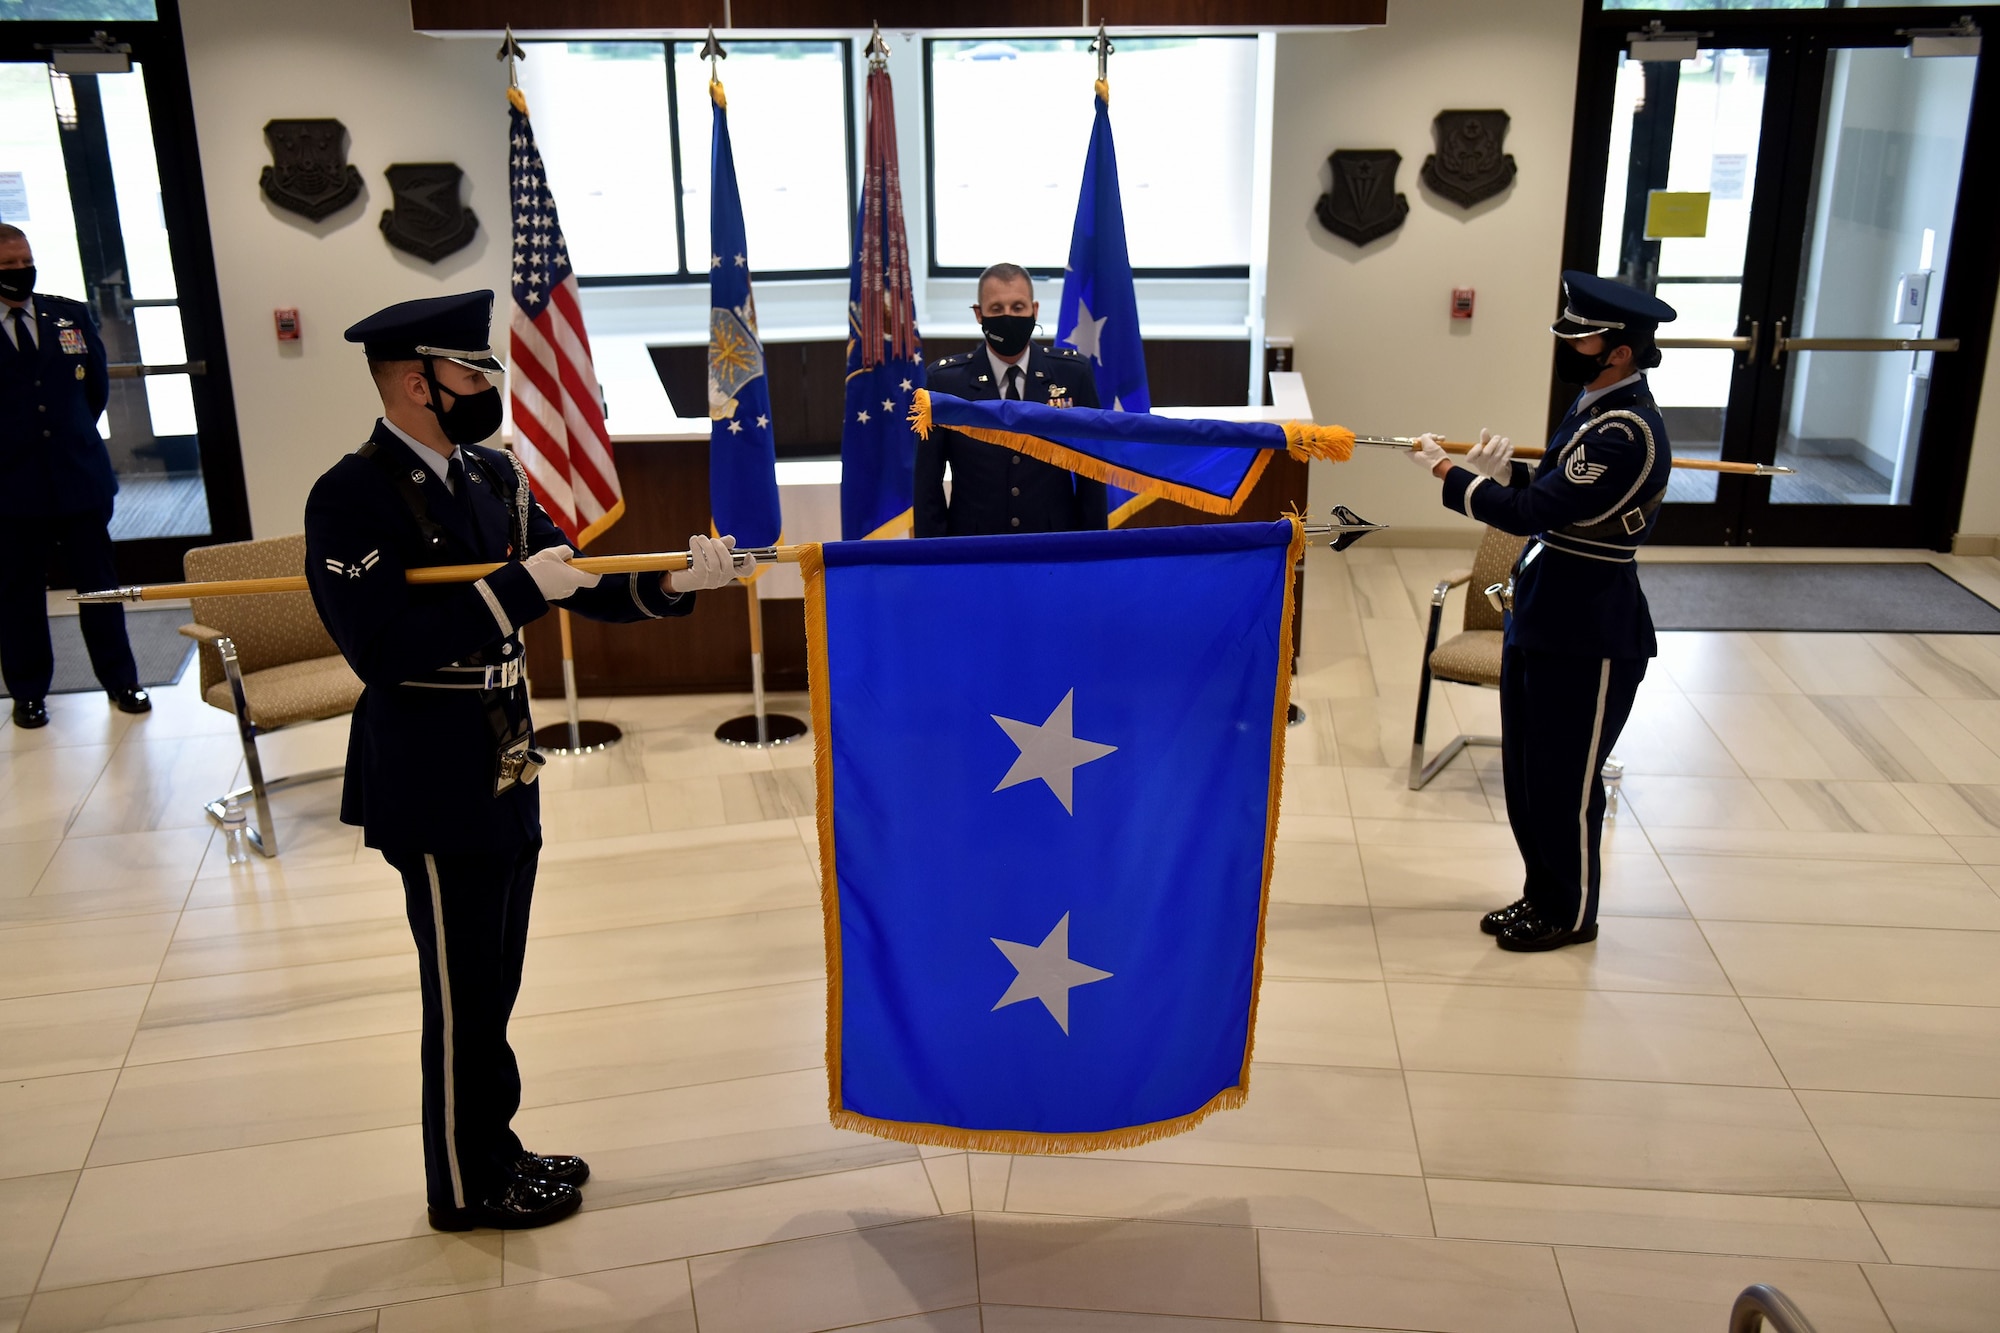 Photos of the ceremony promoting Matthew J. Burger from Brigadier General to major general.